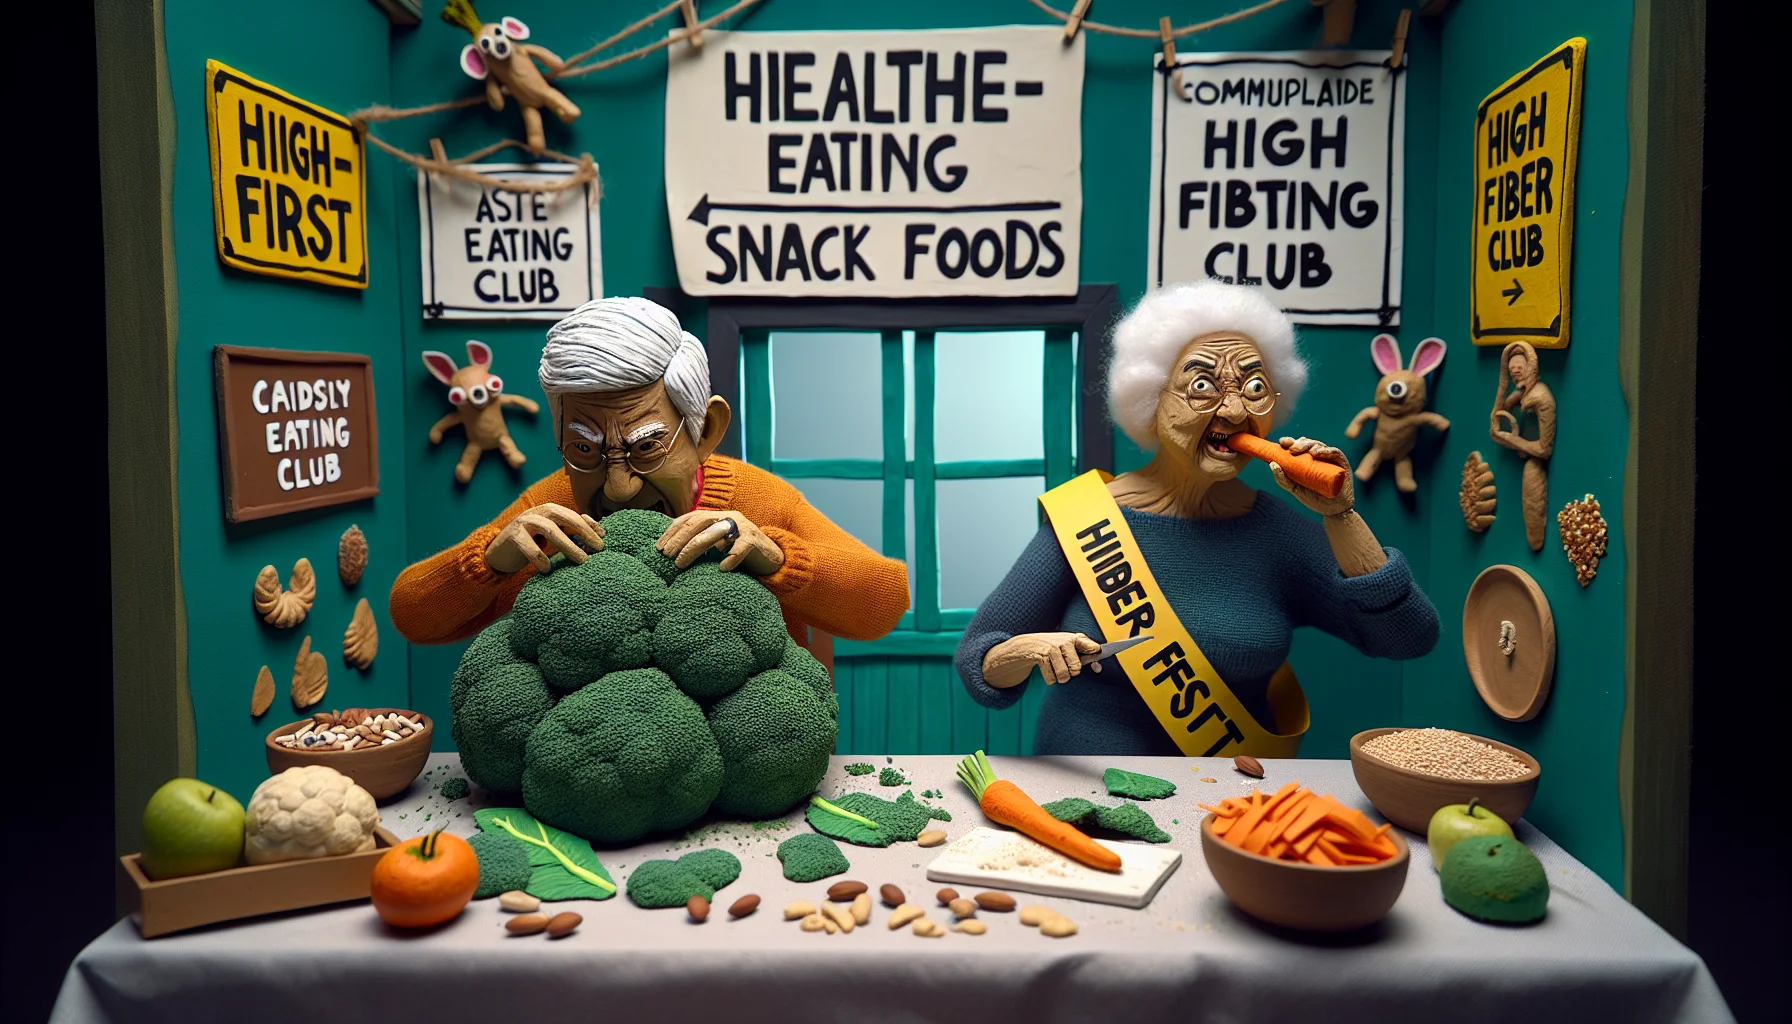 Craft an amusing, realistic depiction of elderly individuals engaged in a comical dieting scene. The focus is on high-fiber snack foods. On the left, an elderly South Asian male mischievously sneaks a bite from a large broccoli while wearing a 'healthy eating club' sash. On the right, a spirited Black elderly woman rolls her eyes as she wins an impromptu carrot peeling competition. Scattered around the room are humorous signs reminding everyone of the 'fiber-first' rule and commonplace high fiber foods, such as whole grains, nuts, and beans, subtly incorporated into the decor.